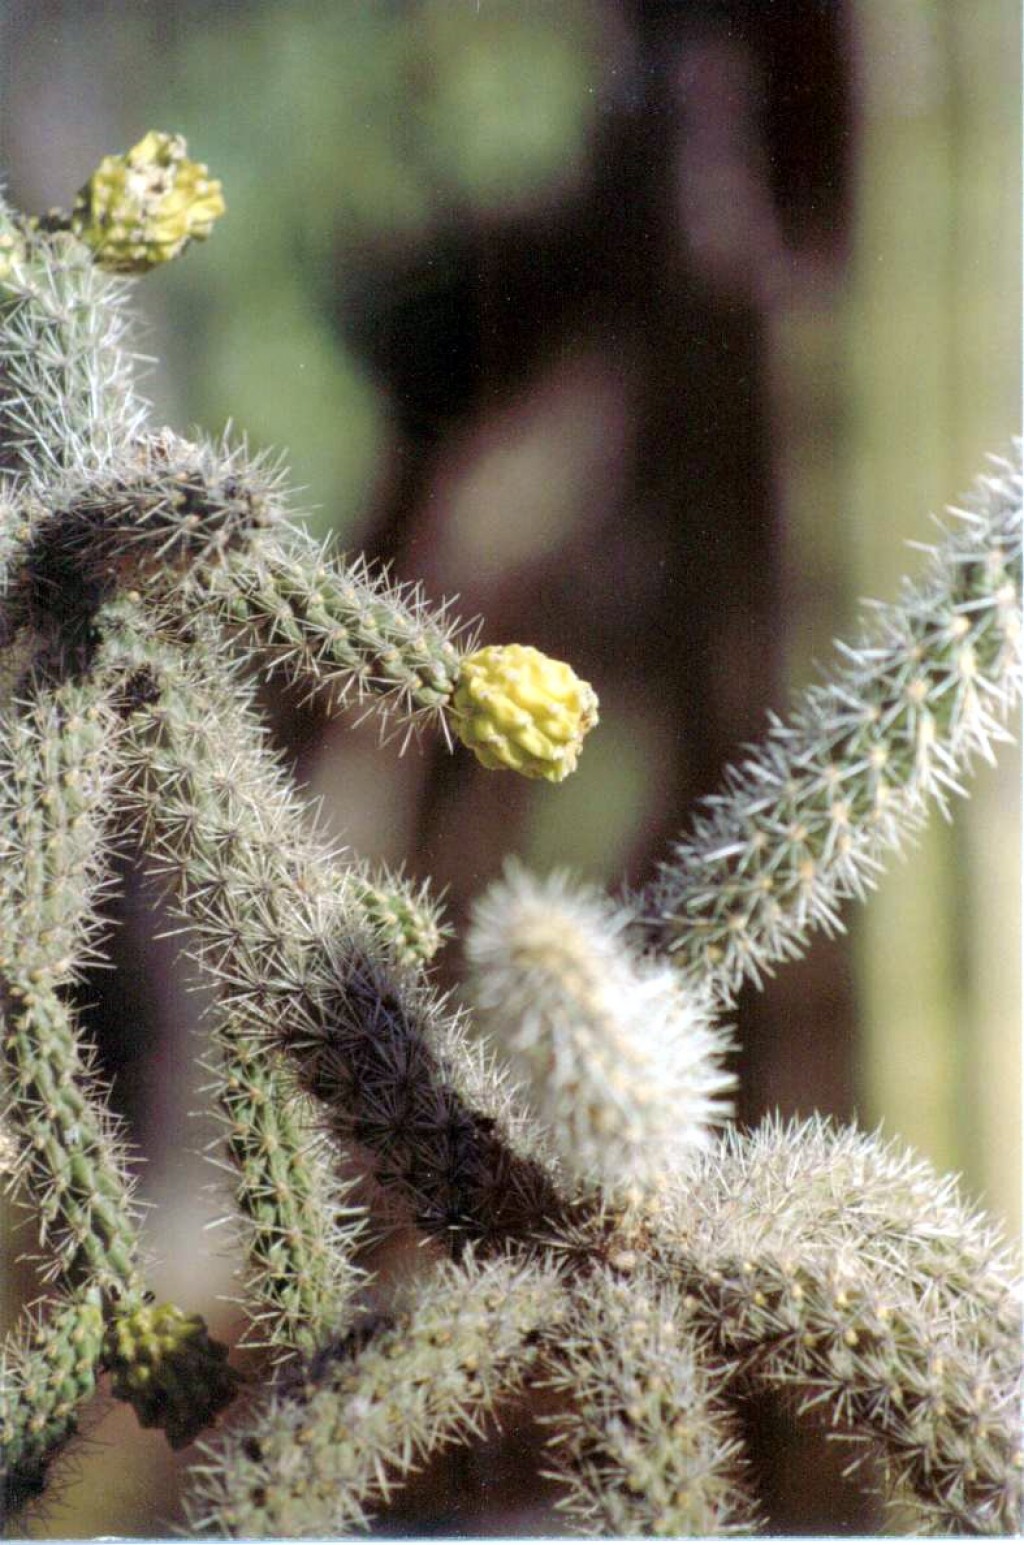 The flowers were beautiful on the teddy bear cholla.